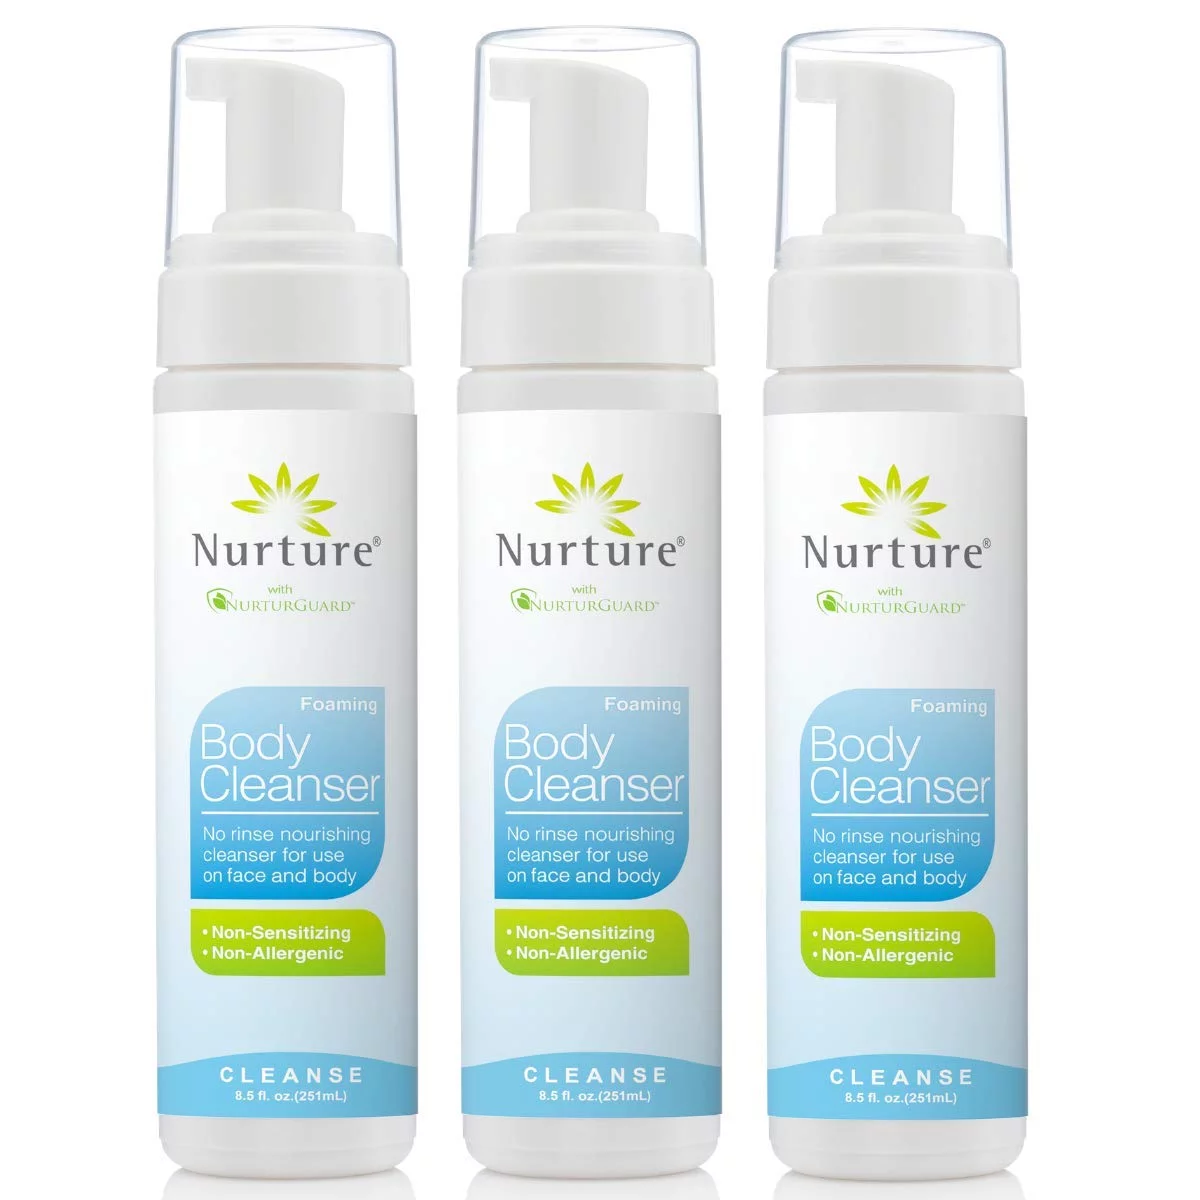 Nurture Valley No Rinse Body Wash, Full Body Cleansing Foam That also Moisturizes, and Protects Skin - Non-Allergenic - Non-Sensitizing - Rinse Free Wipe Away Cleanser - 3 Bottles